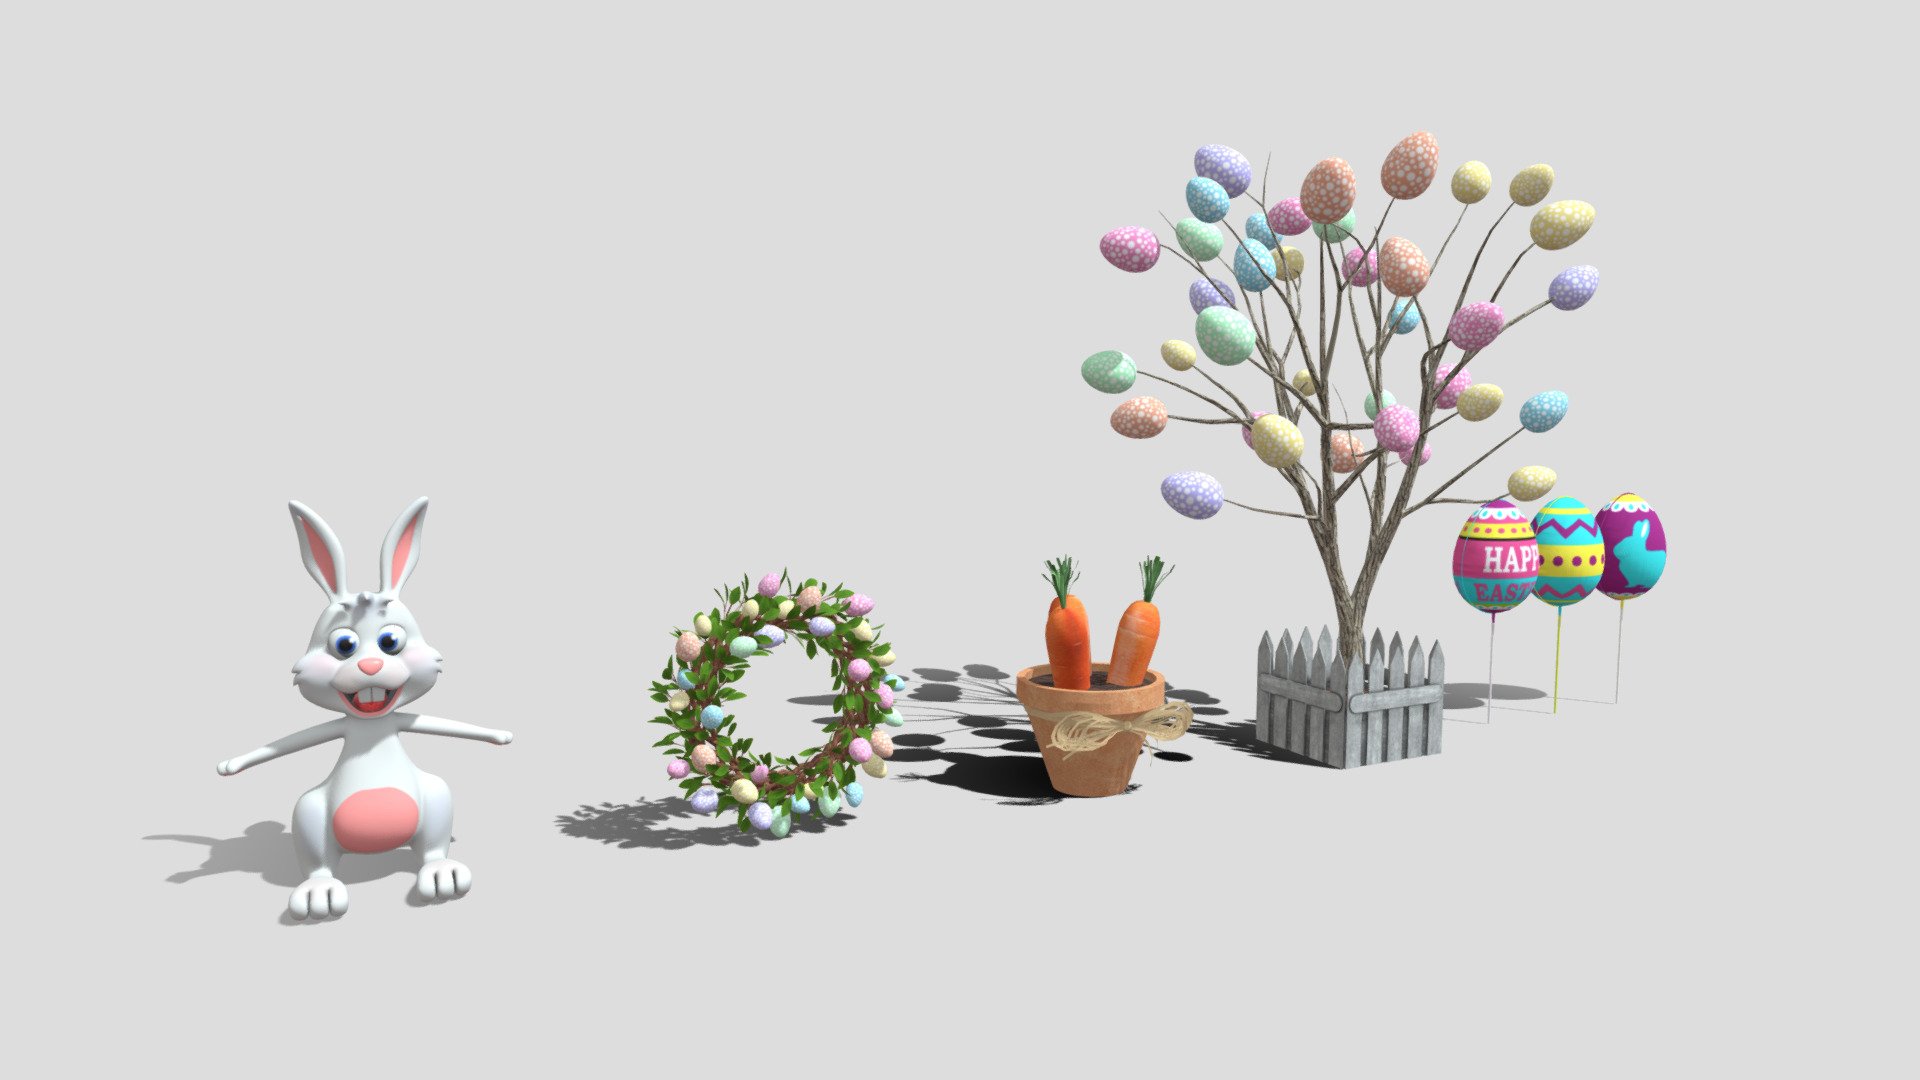 Lowpoly 3d models for easter decorations.

Pack includes (individual assets in links):


Easter rabbit
Easter Door Wreath
Carrot plant
Tree
Easter ballons pack
Cake

Available in OBJ &amp; FBX - Easter decorations pack - Download Free 3D model by assetfactory 3d model